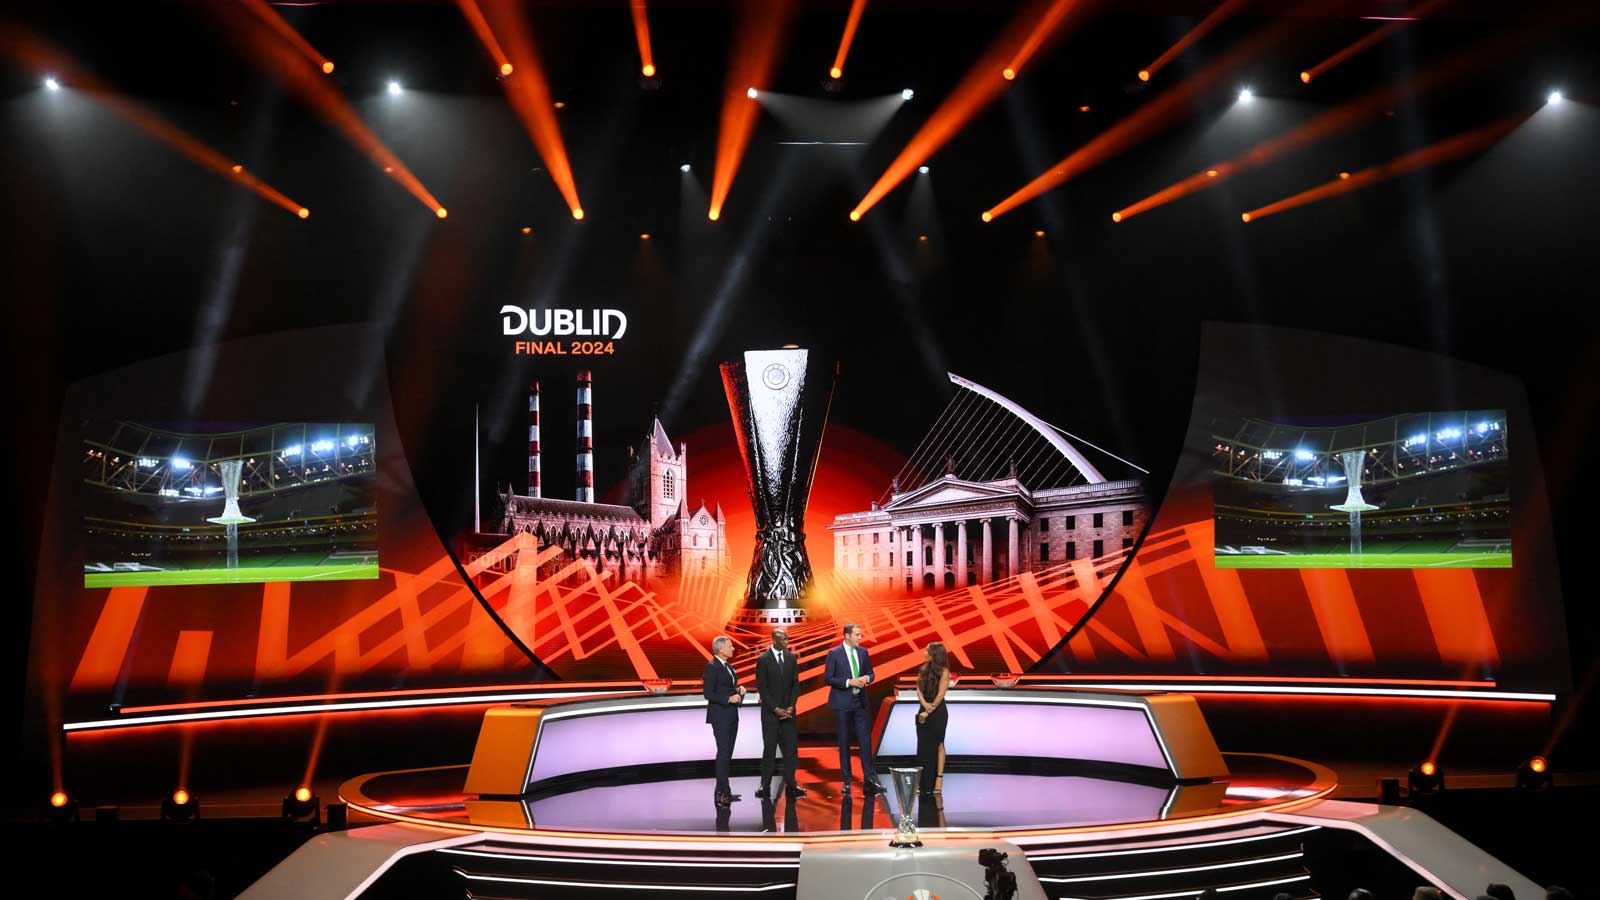 The stage for the Europa League draw